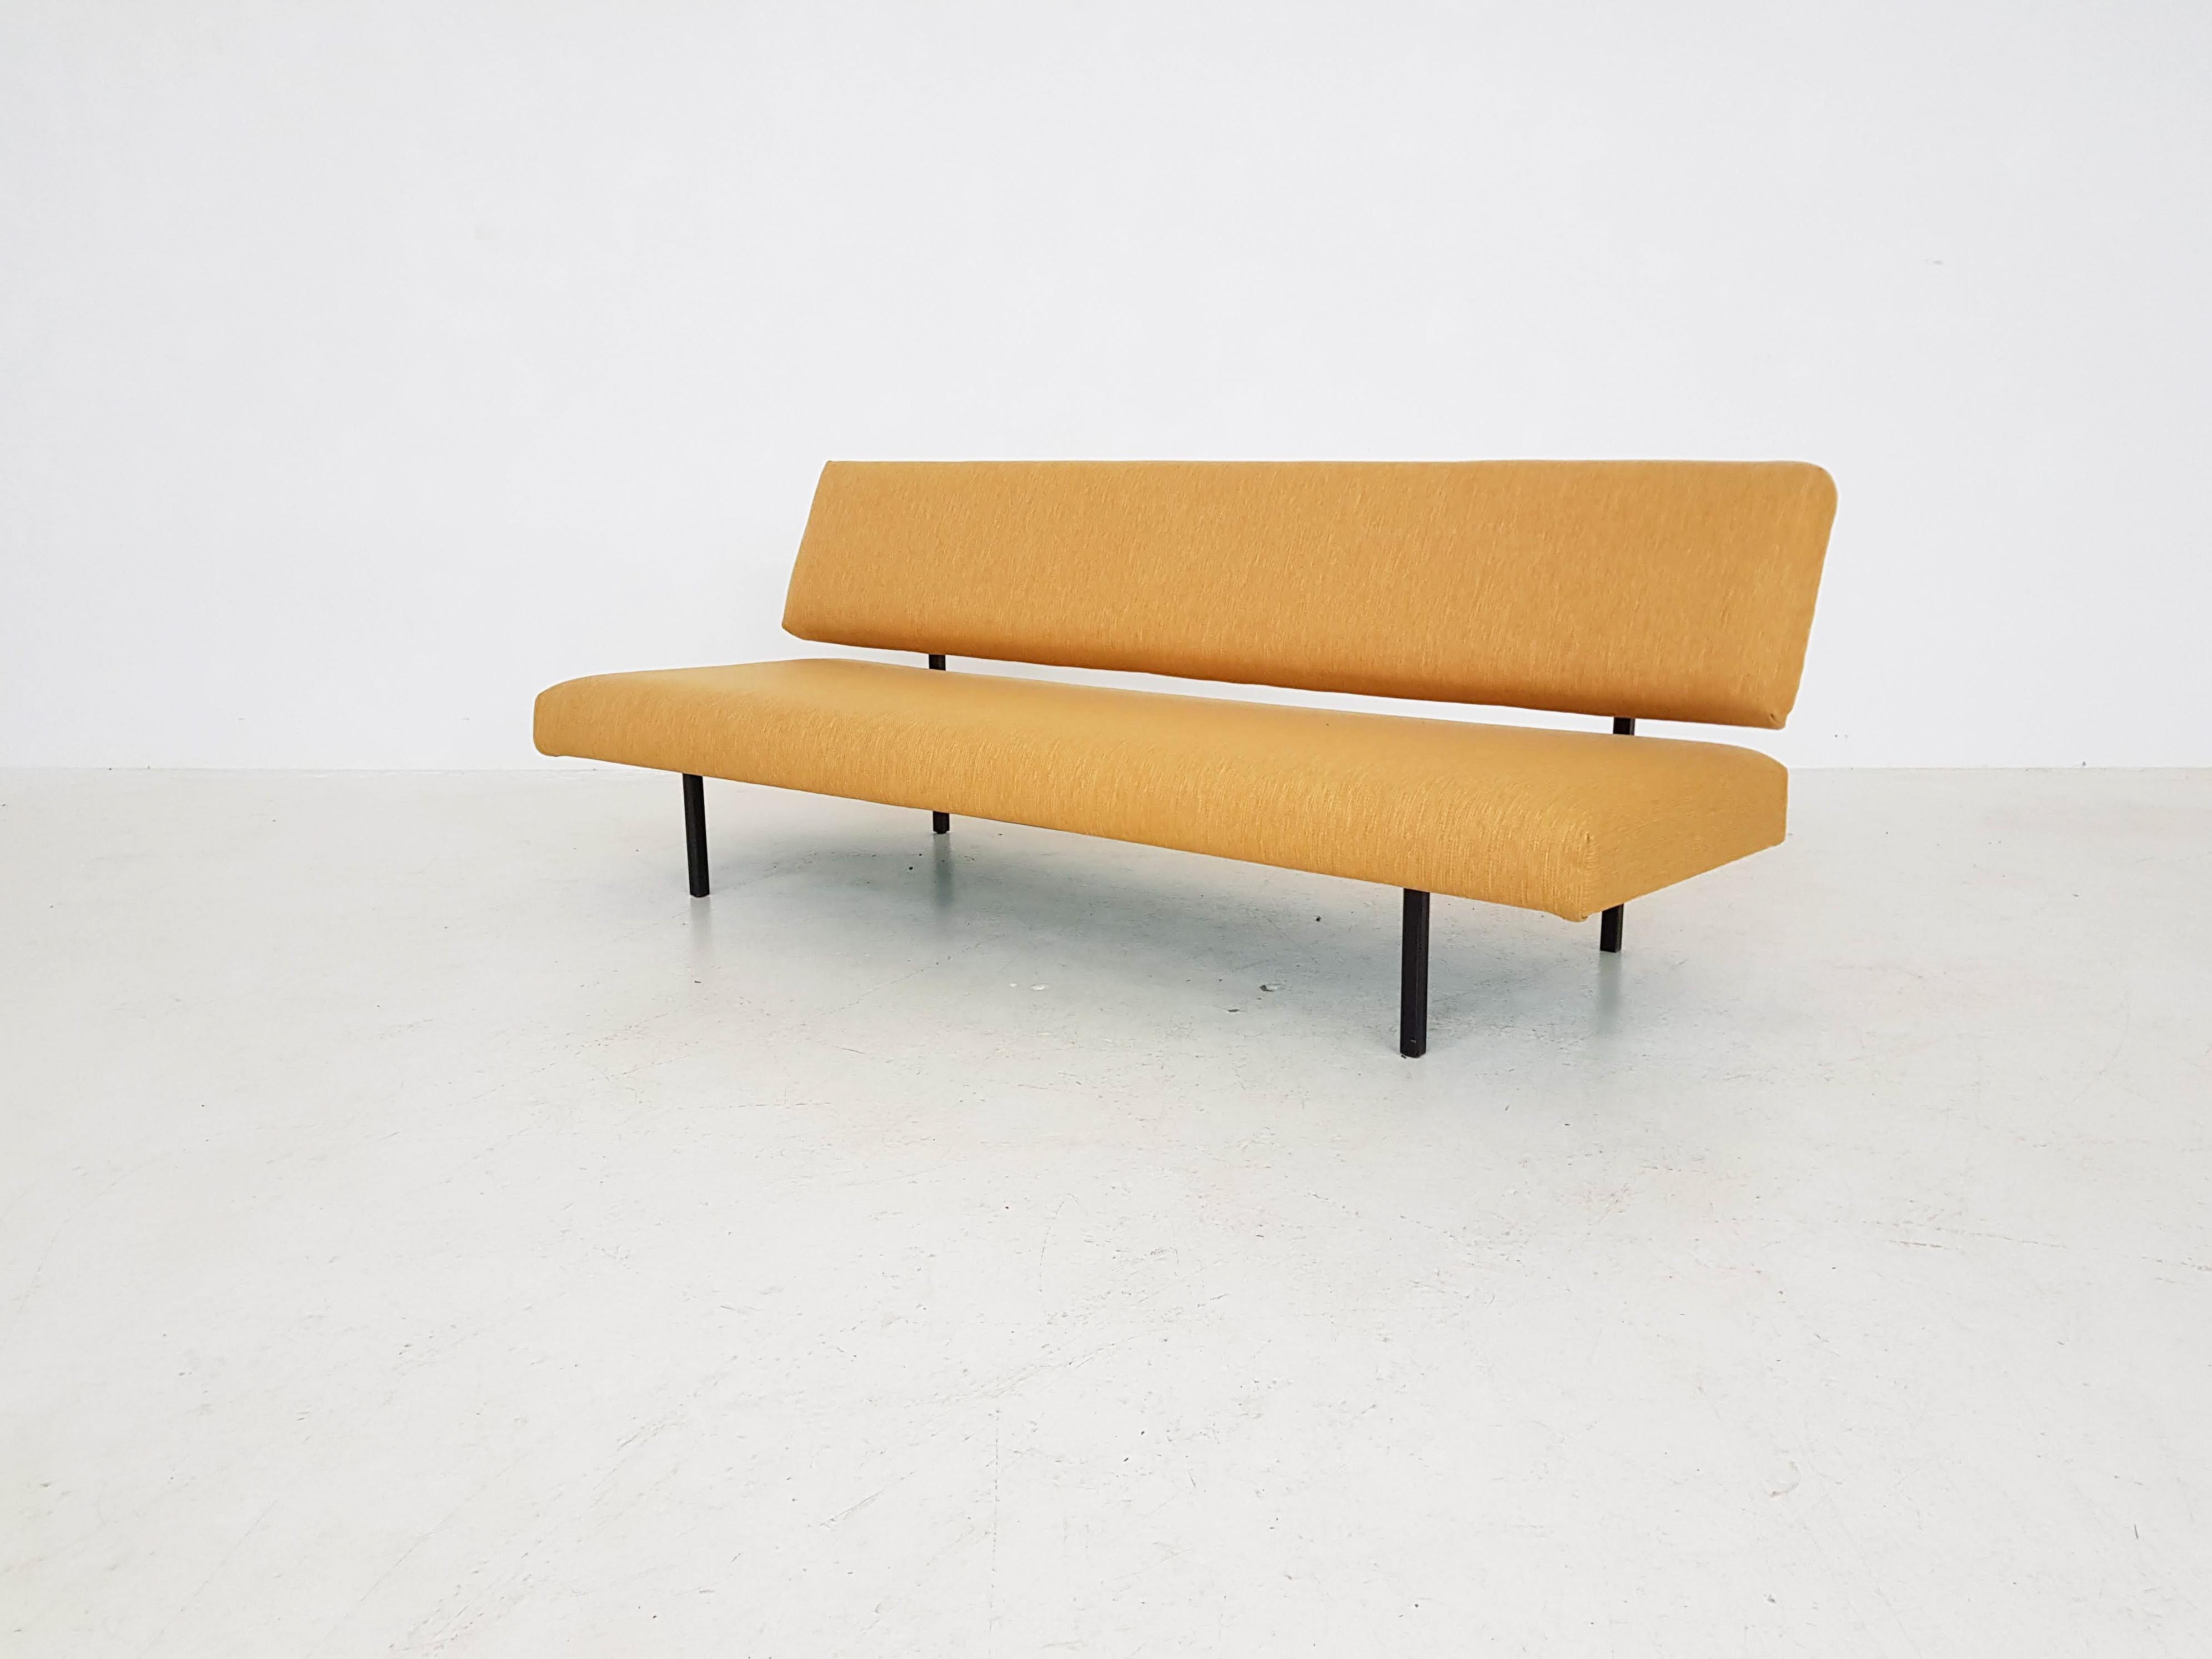 Vintage sleeper sofa or daybed in the style of Martin Visser, Gijs van der Sluis, Rob Parry and Coen de Vries. It is highly likely a design of one of those designers.

What we have here is a typically Dutch mid-century modern sofa with its sleek